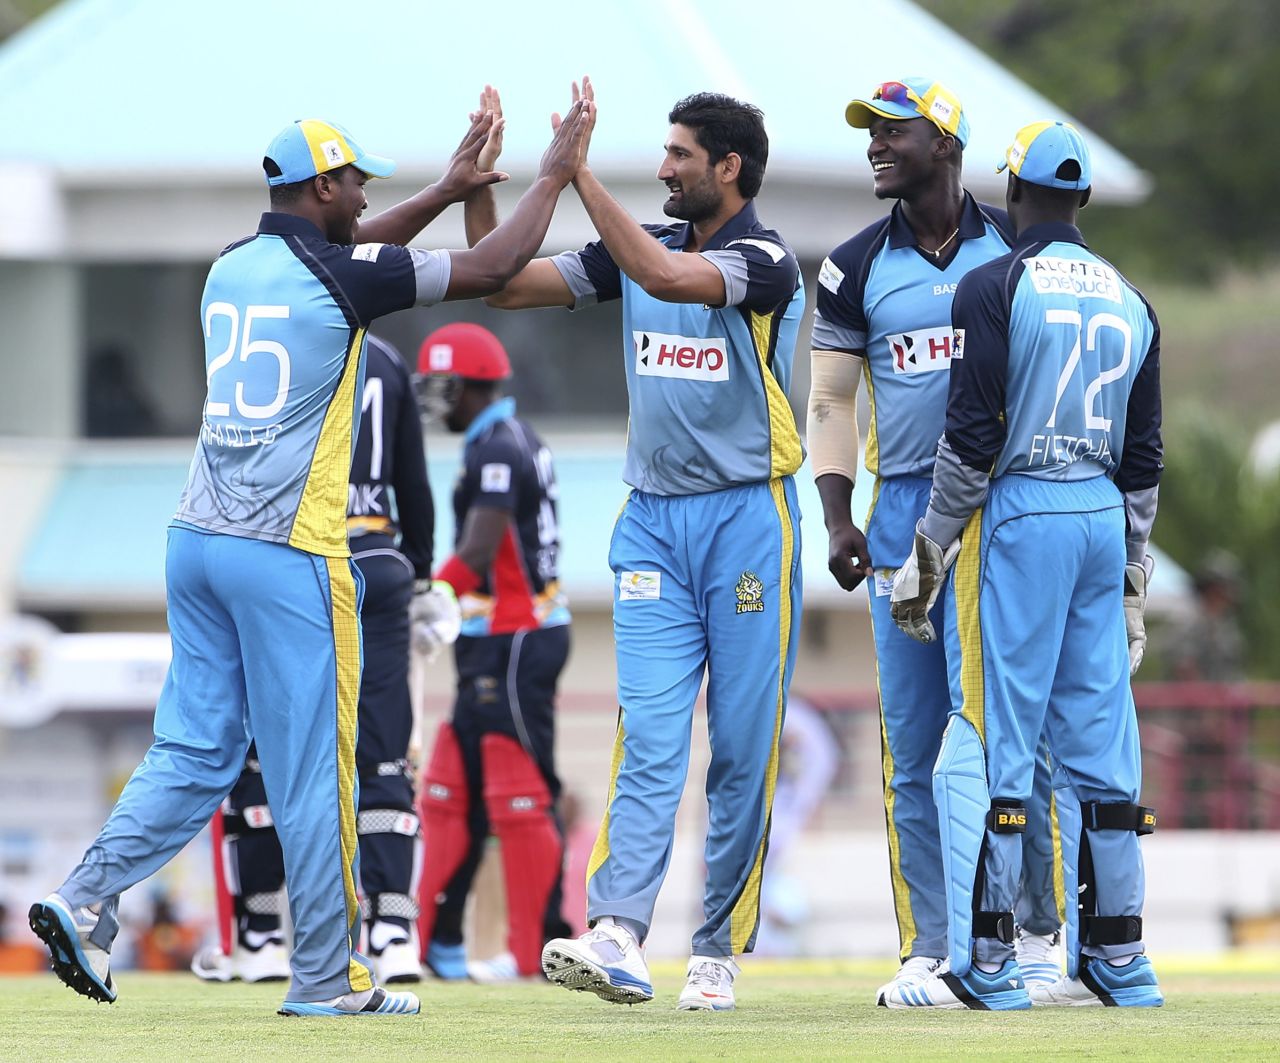 Sohail Tanvir gets congratulated after one of his three wickets, St Lucia Zouks v Antigua Hawksbills, CPL 2014, Gros Islet, August 3, 2014